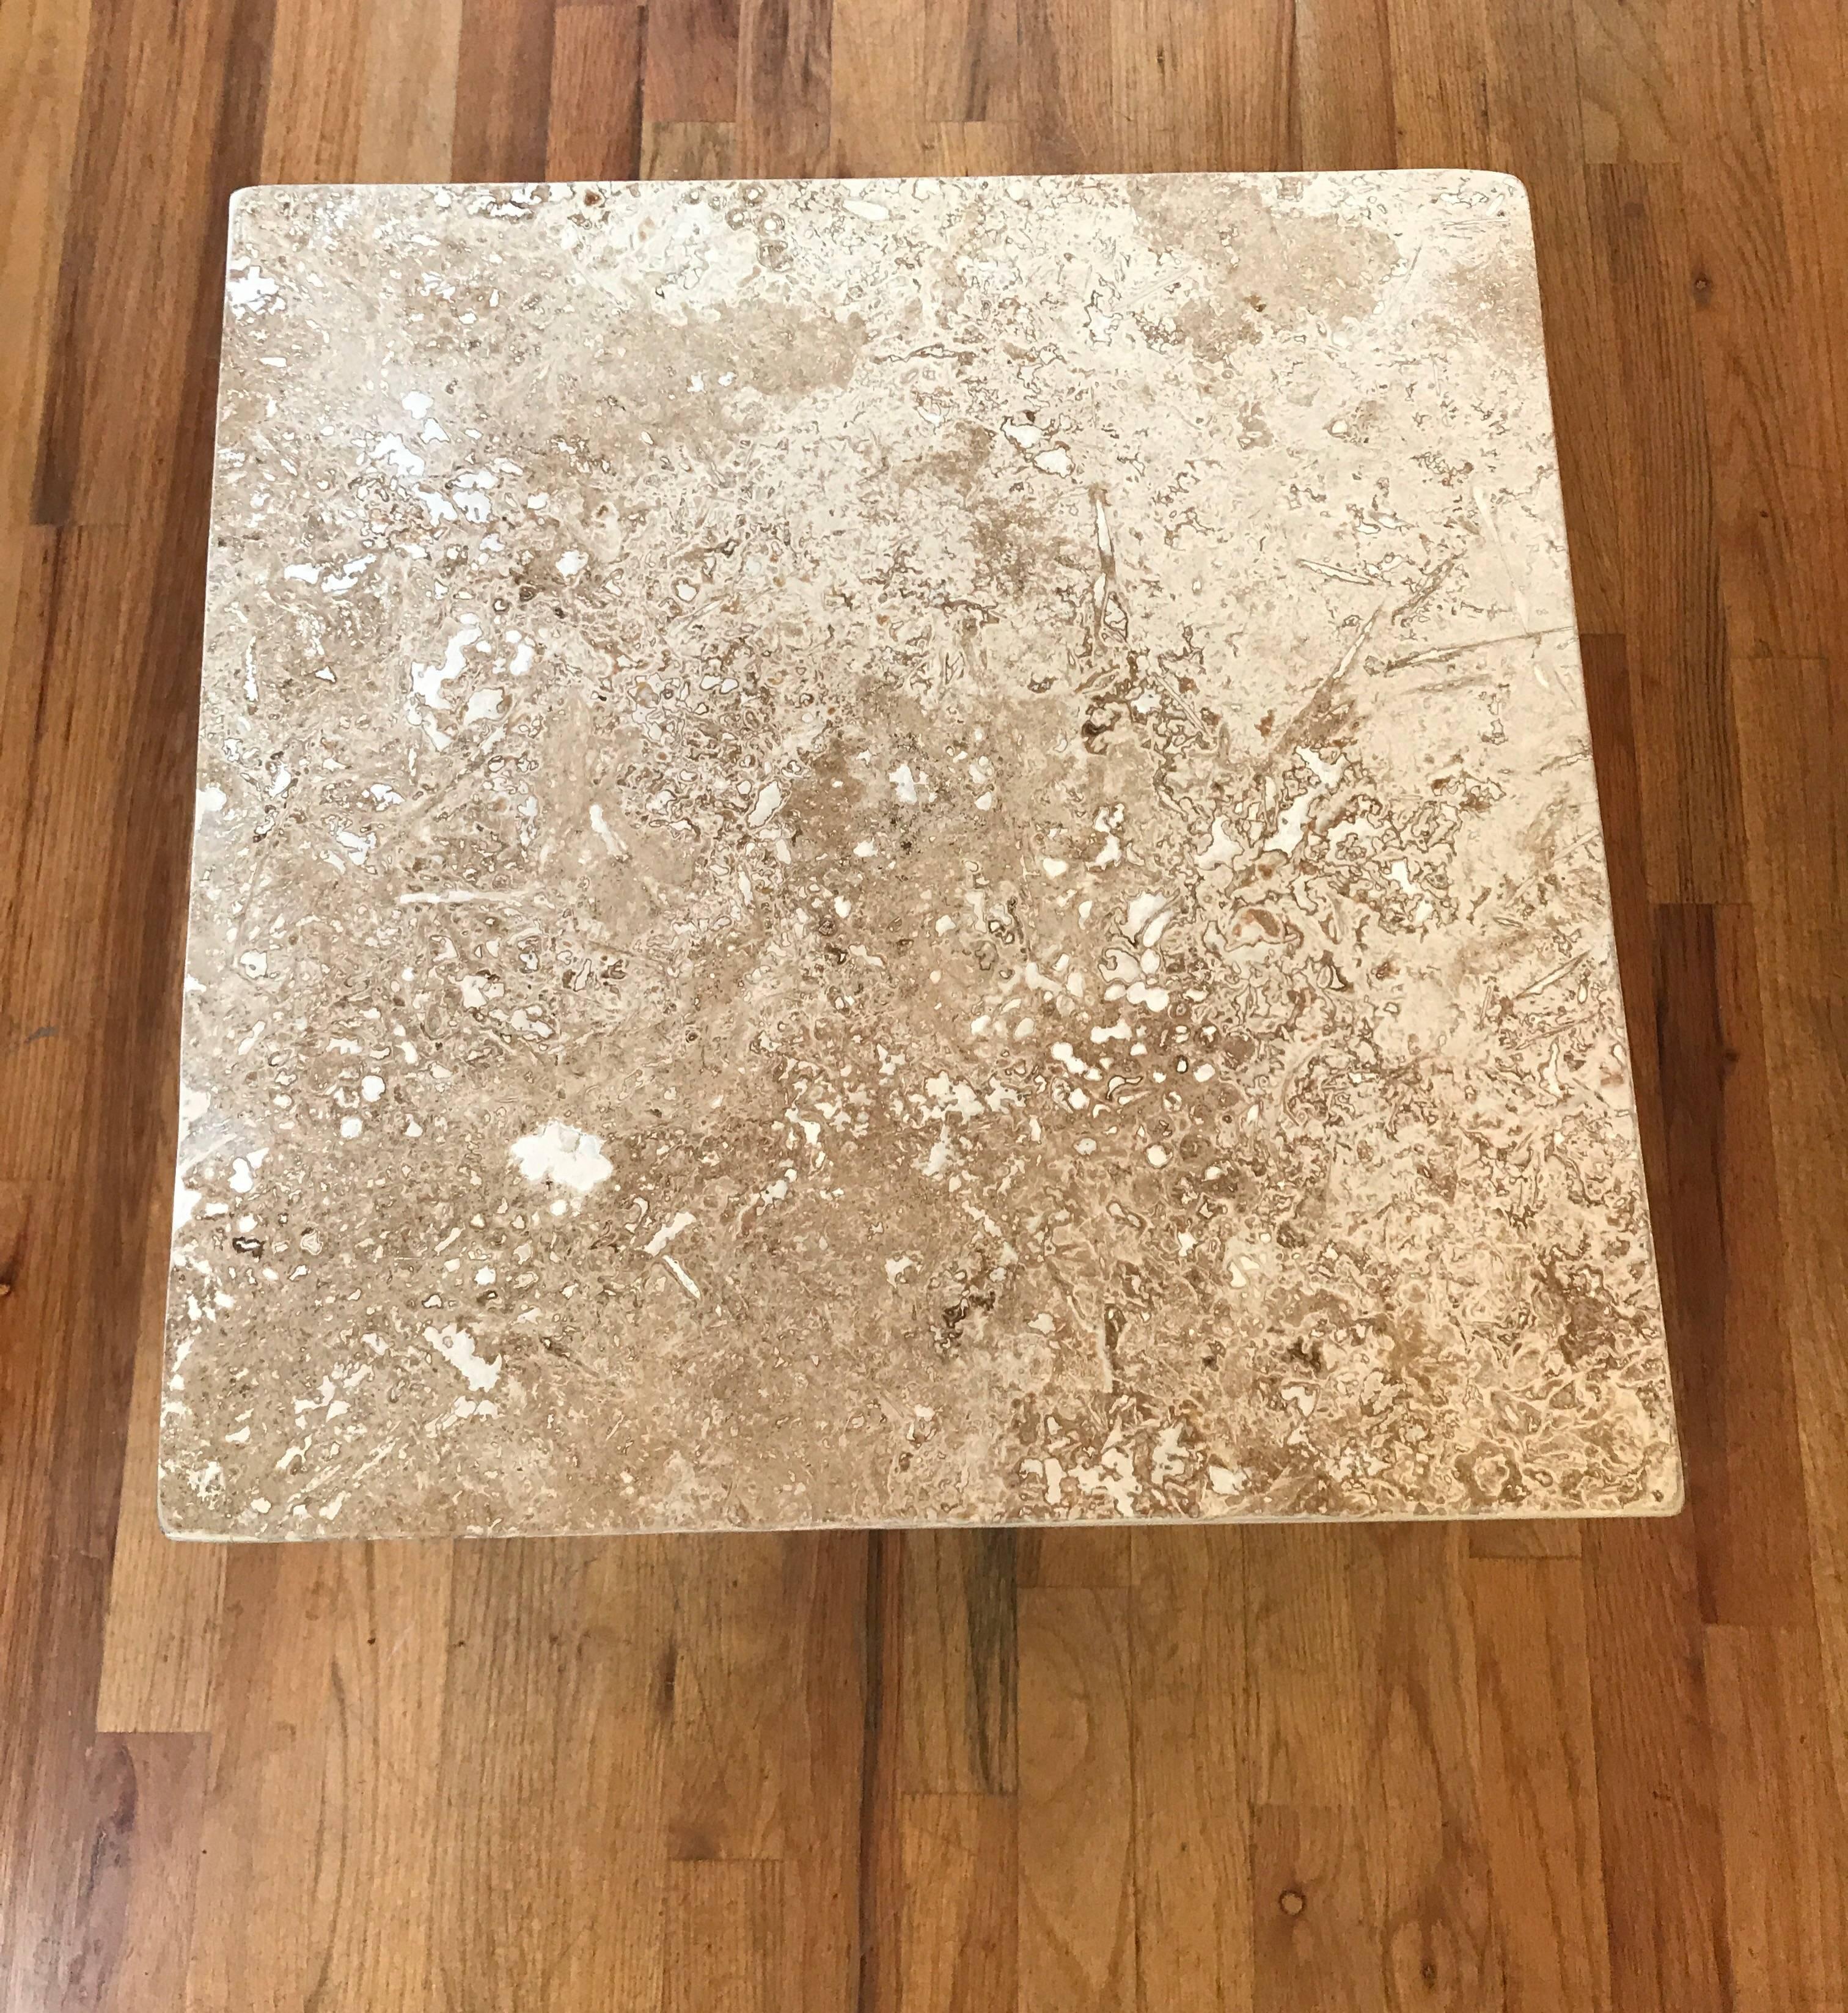 Travertine side or end table. This modern richly veined cube would make for a good drinks table.